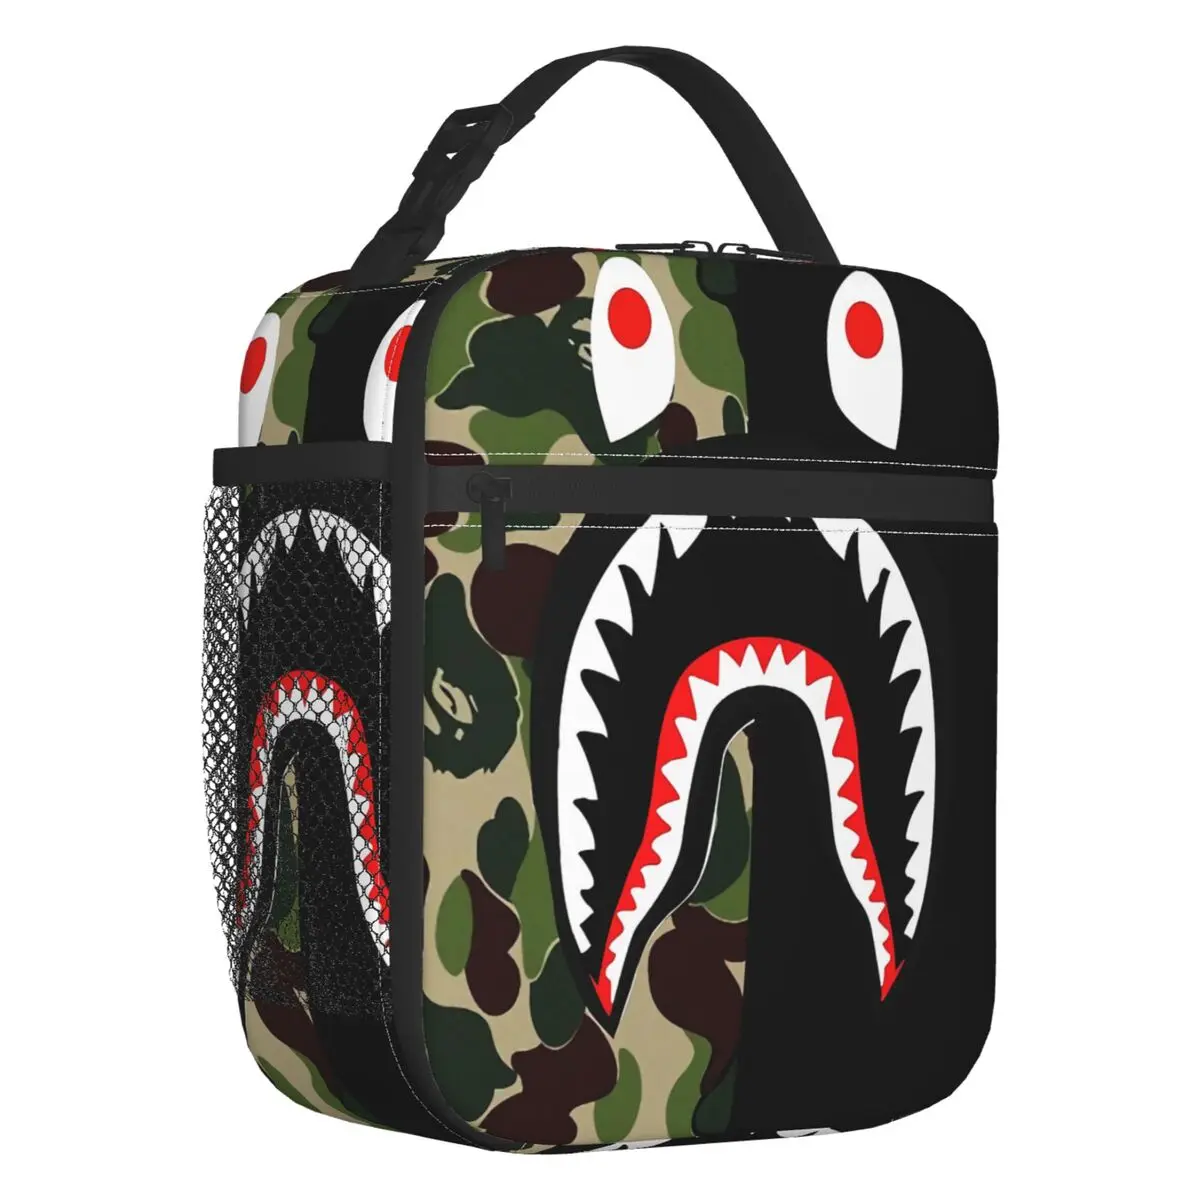 Camo Camouflage Old Insulated Lunch Tote Bag for Women Shark Teeth Pattern Portable Cooler Thermal Bento Box School